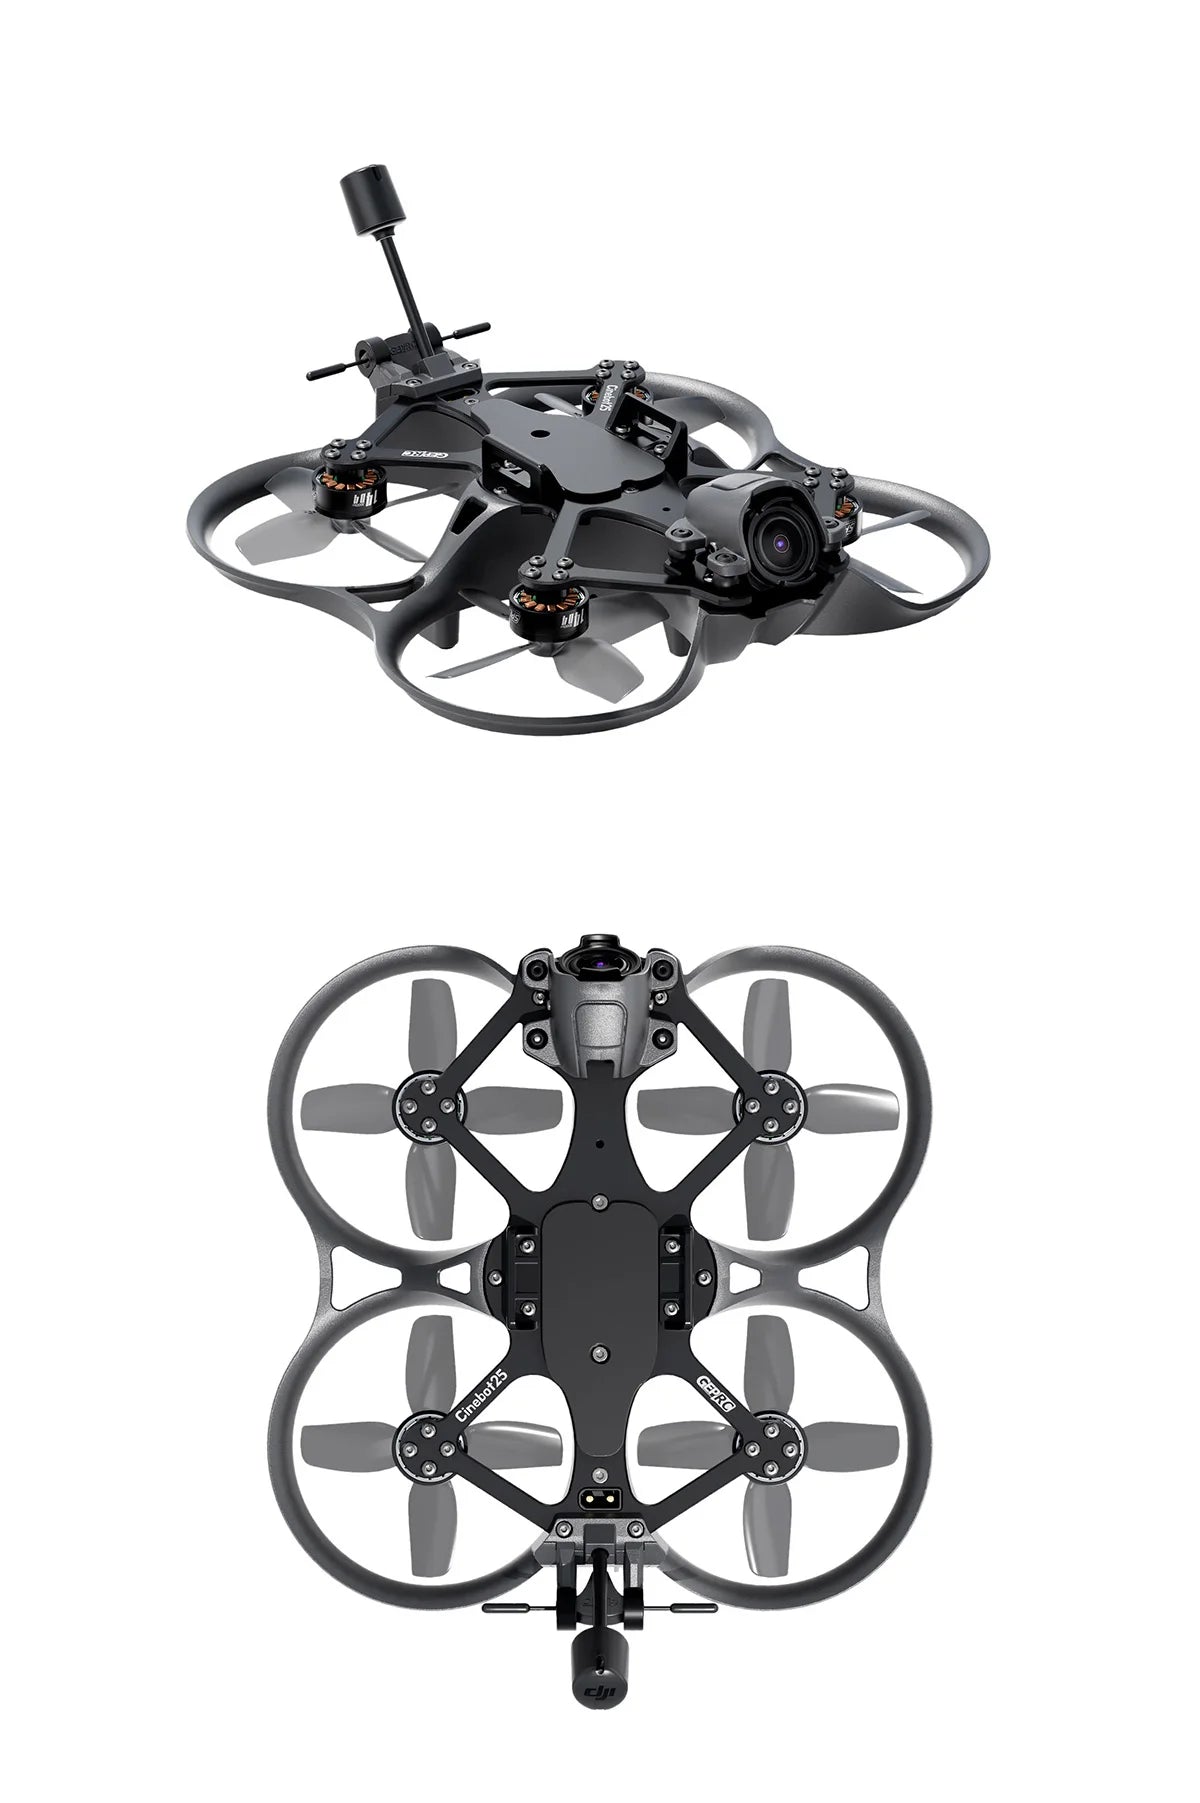 GEPRC Cinebot25 WTFPV FPV Drone, if the payment amount is greater than 150 euros, AiExpress will not charge any